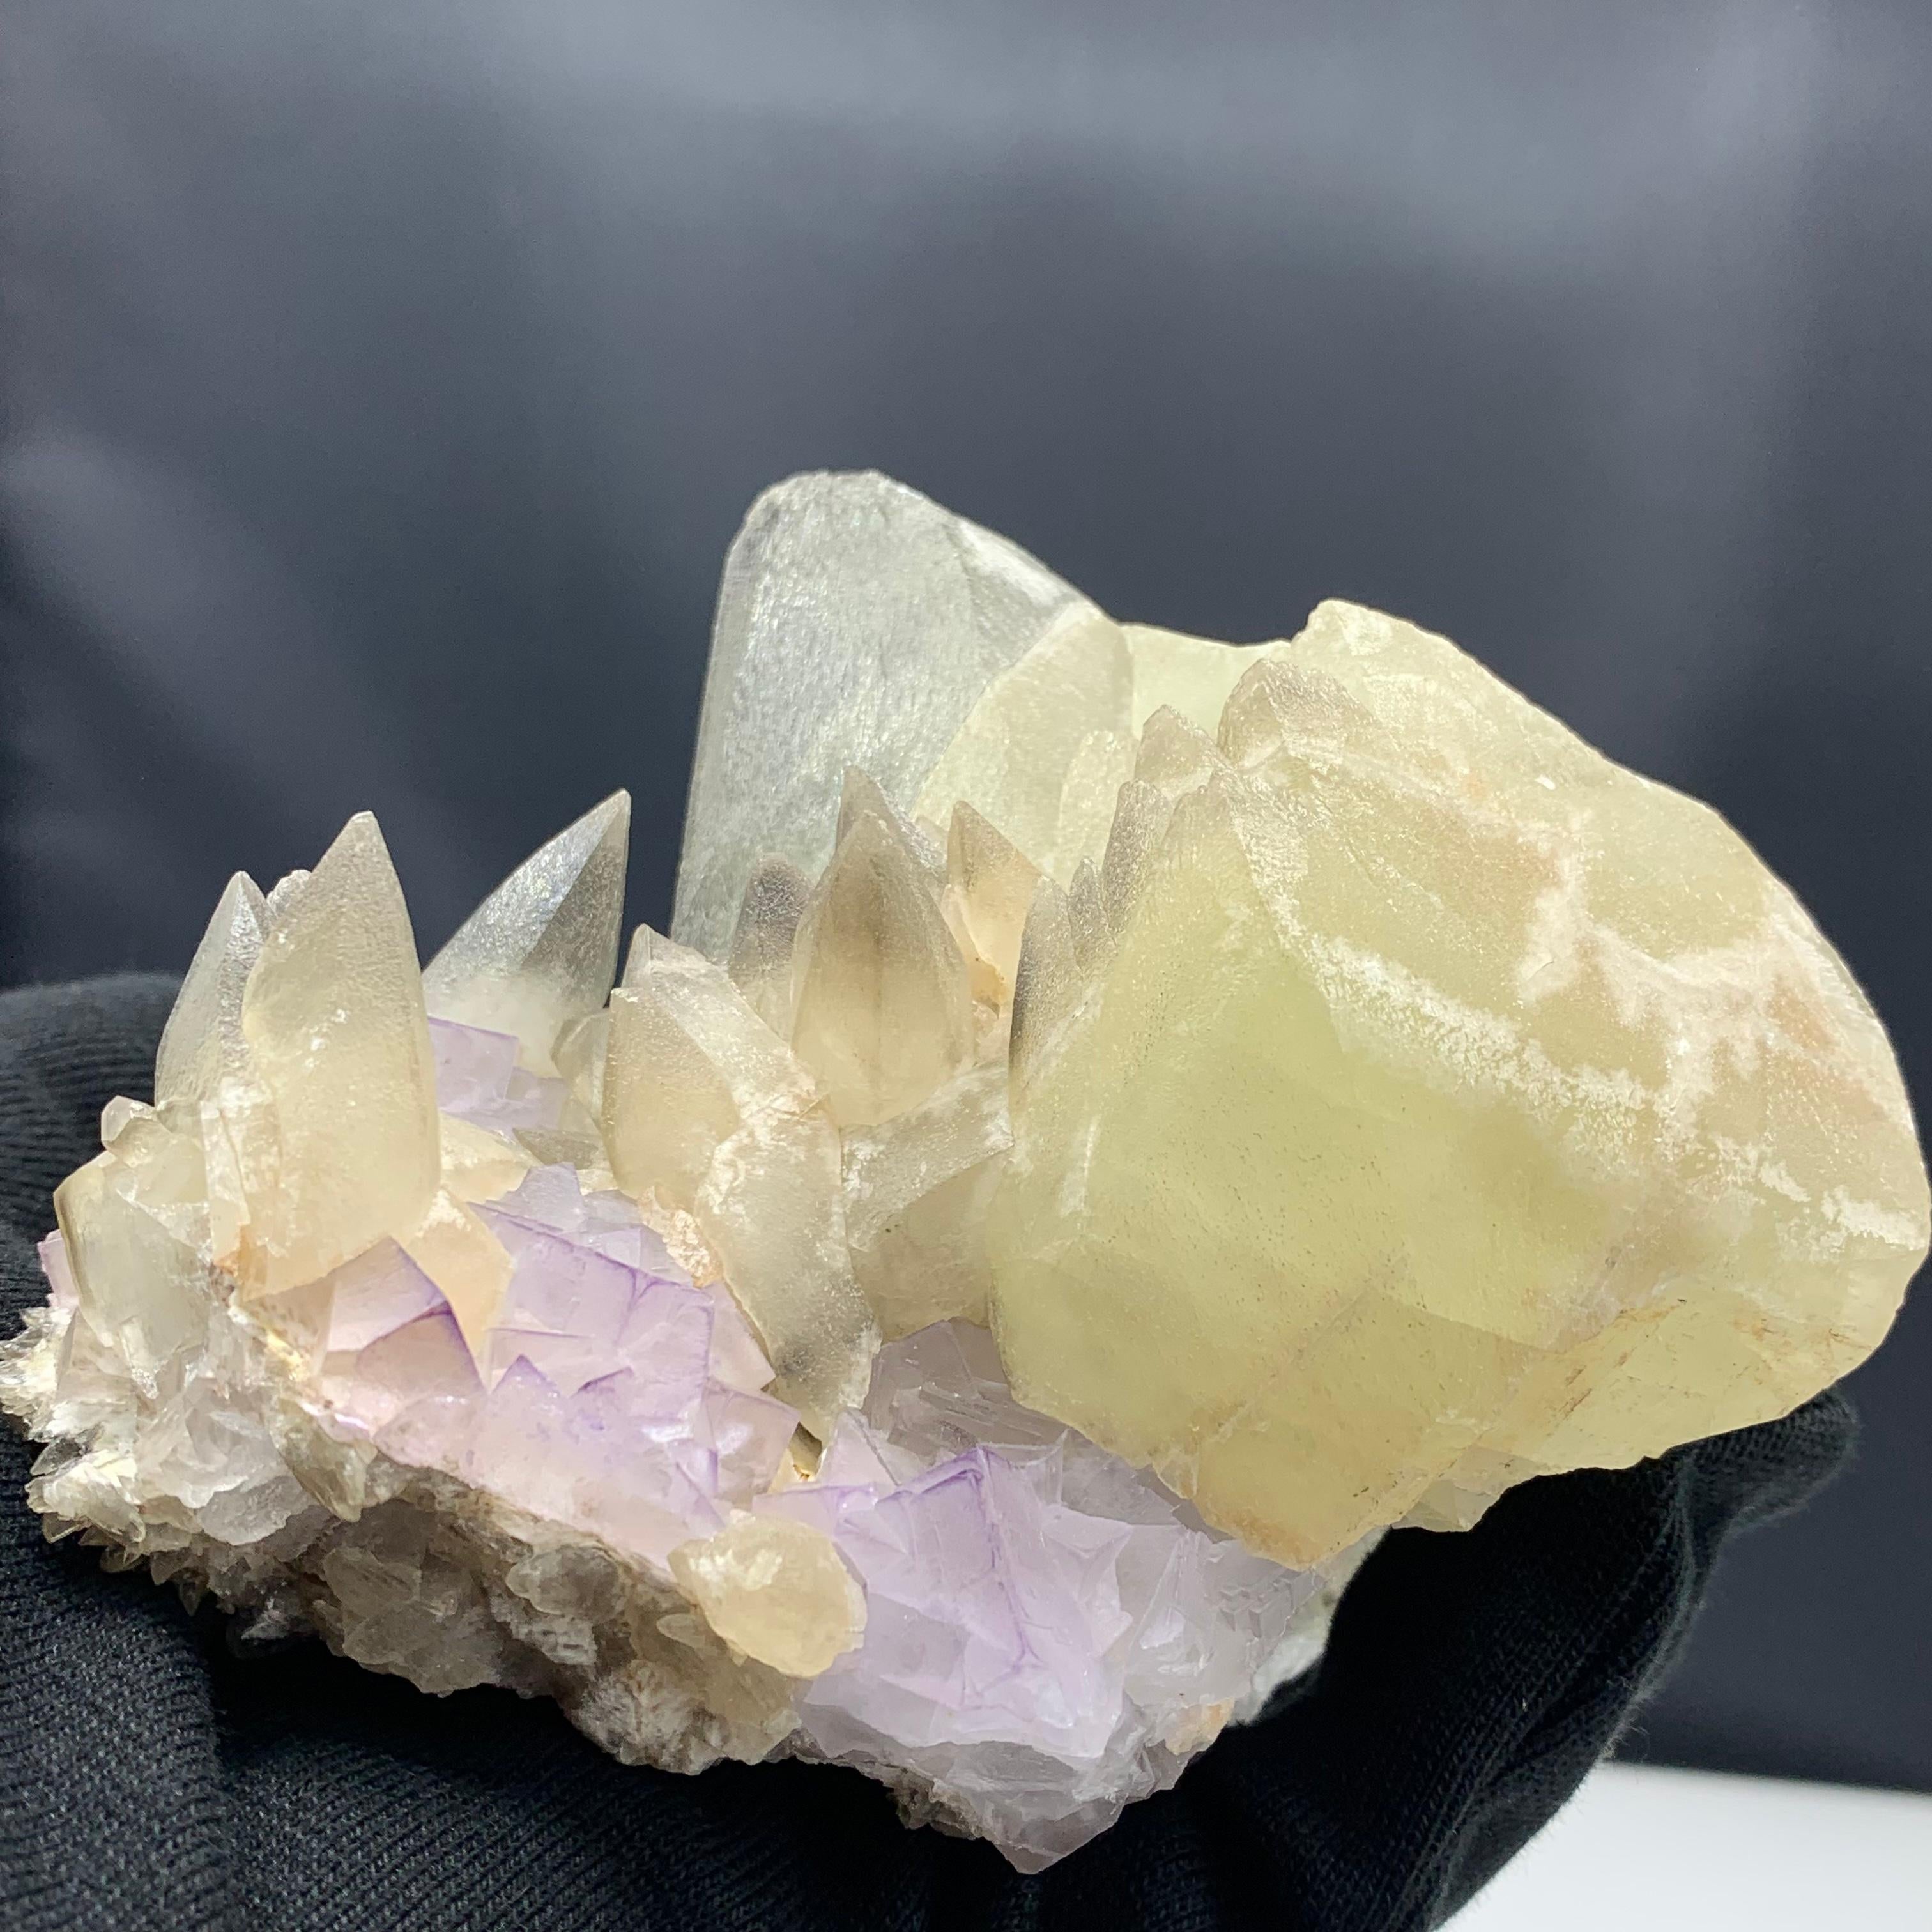 Rock Crystal 980 Gram Glorious Calcite With Florite Bunch From Balochistan, Pakistan  For Sale